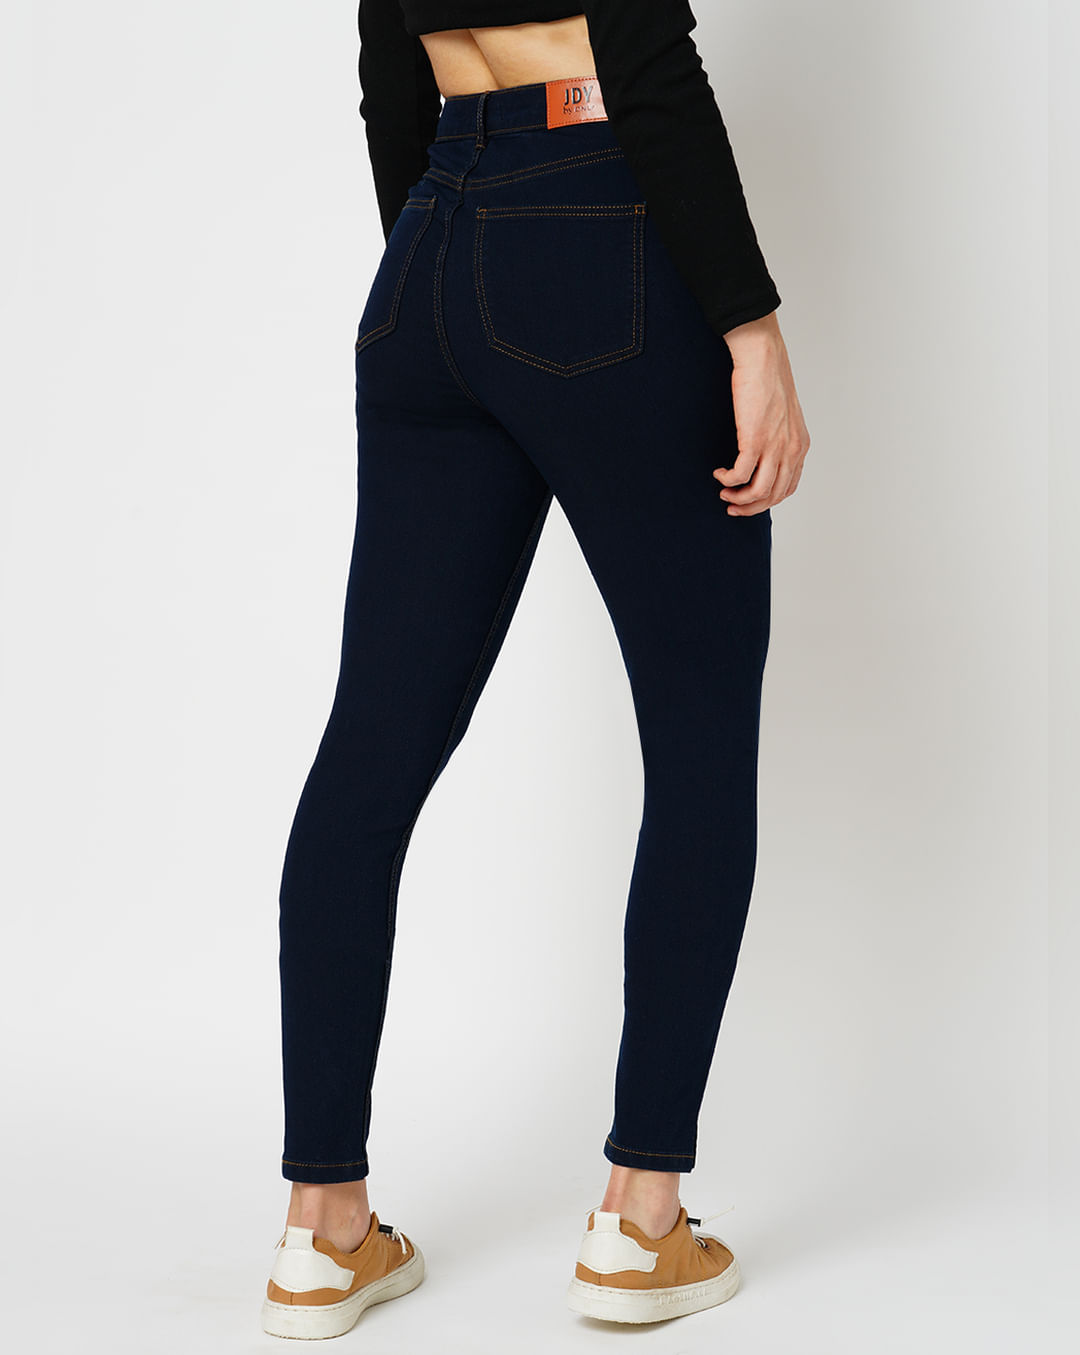 Skinny Trousers Jeggings Jeans Black Navy Pink Zip NEXT day